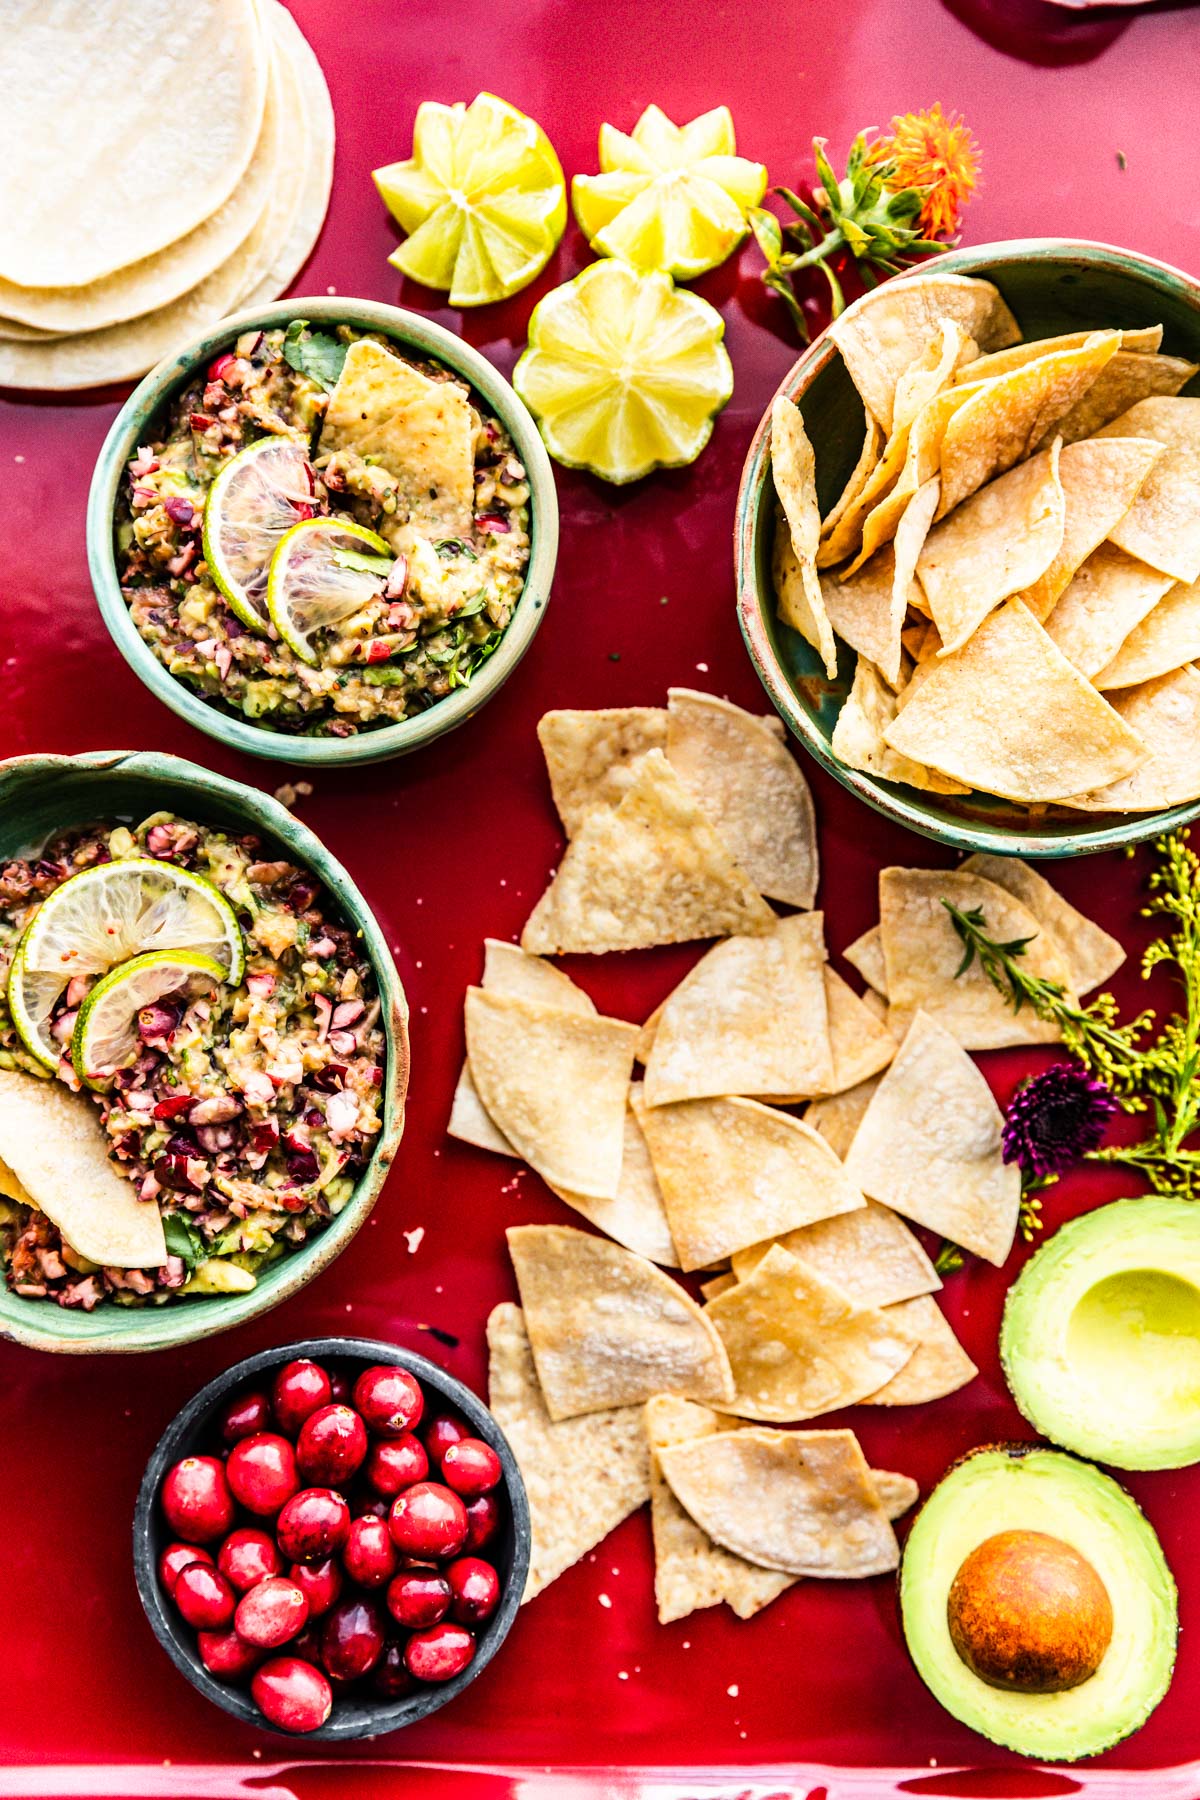 The most delicious healthy party food! FRUIT SALSA with AVOCADO and CRANBERRIES #glutenfreeappetizers #partyfood #chipsanddip